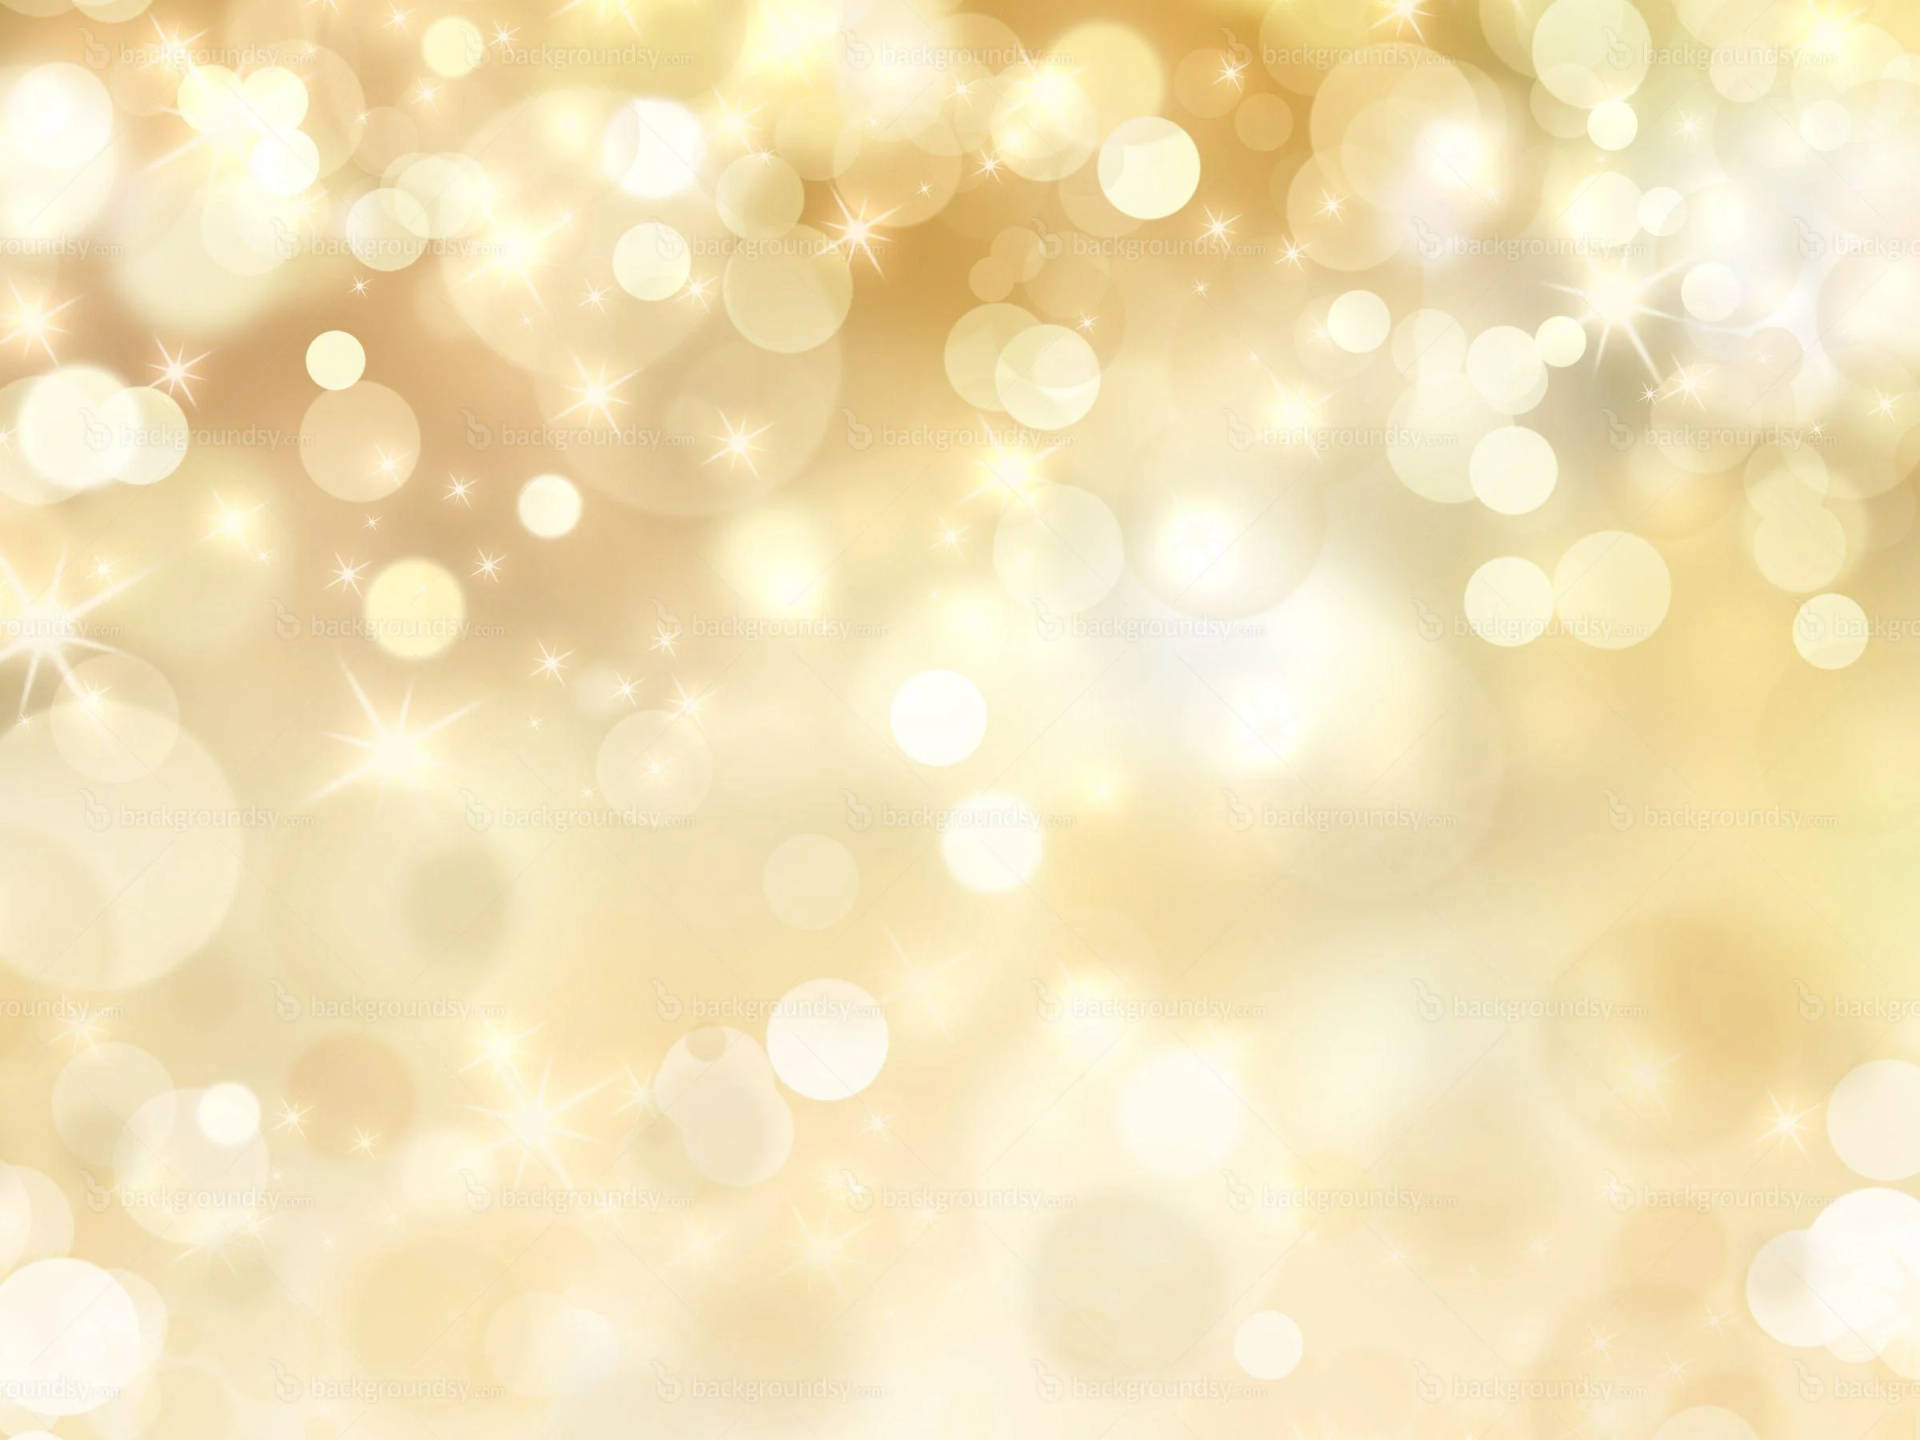 White And Gold Blurred Orbs Wallpaper